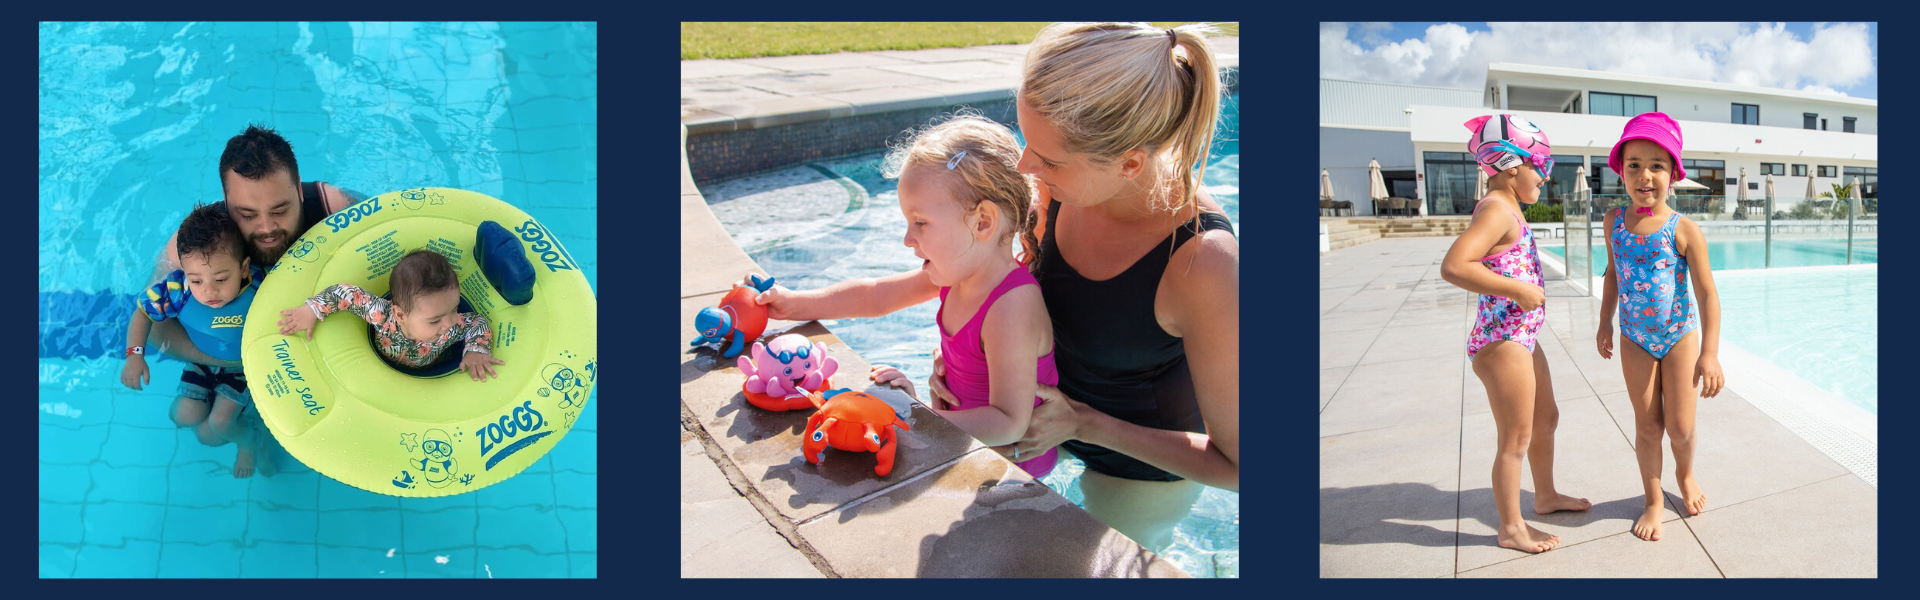 collage image 1 has family in water together image 2 has girl with mum in pool with soakers image 3 has 2 girls next to the pool in swimwear 